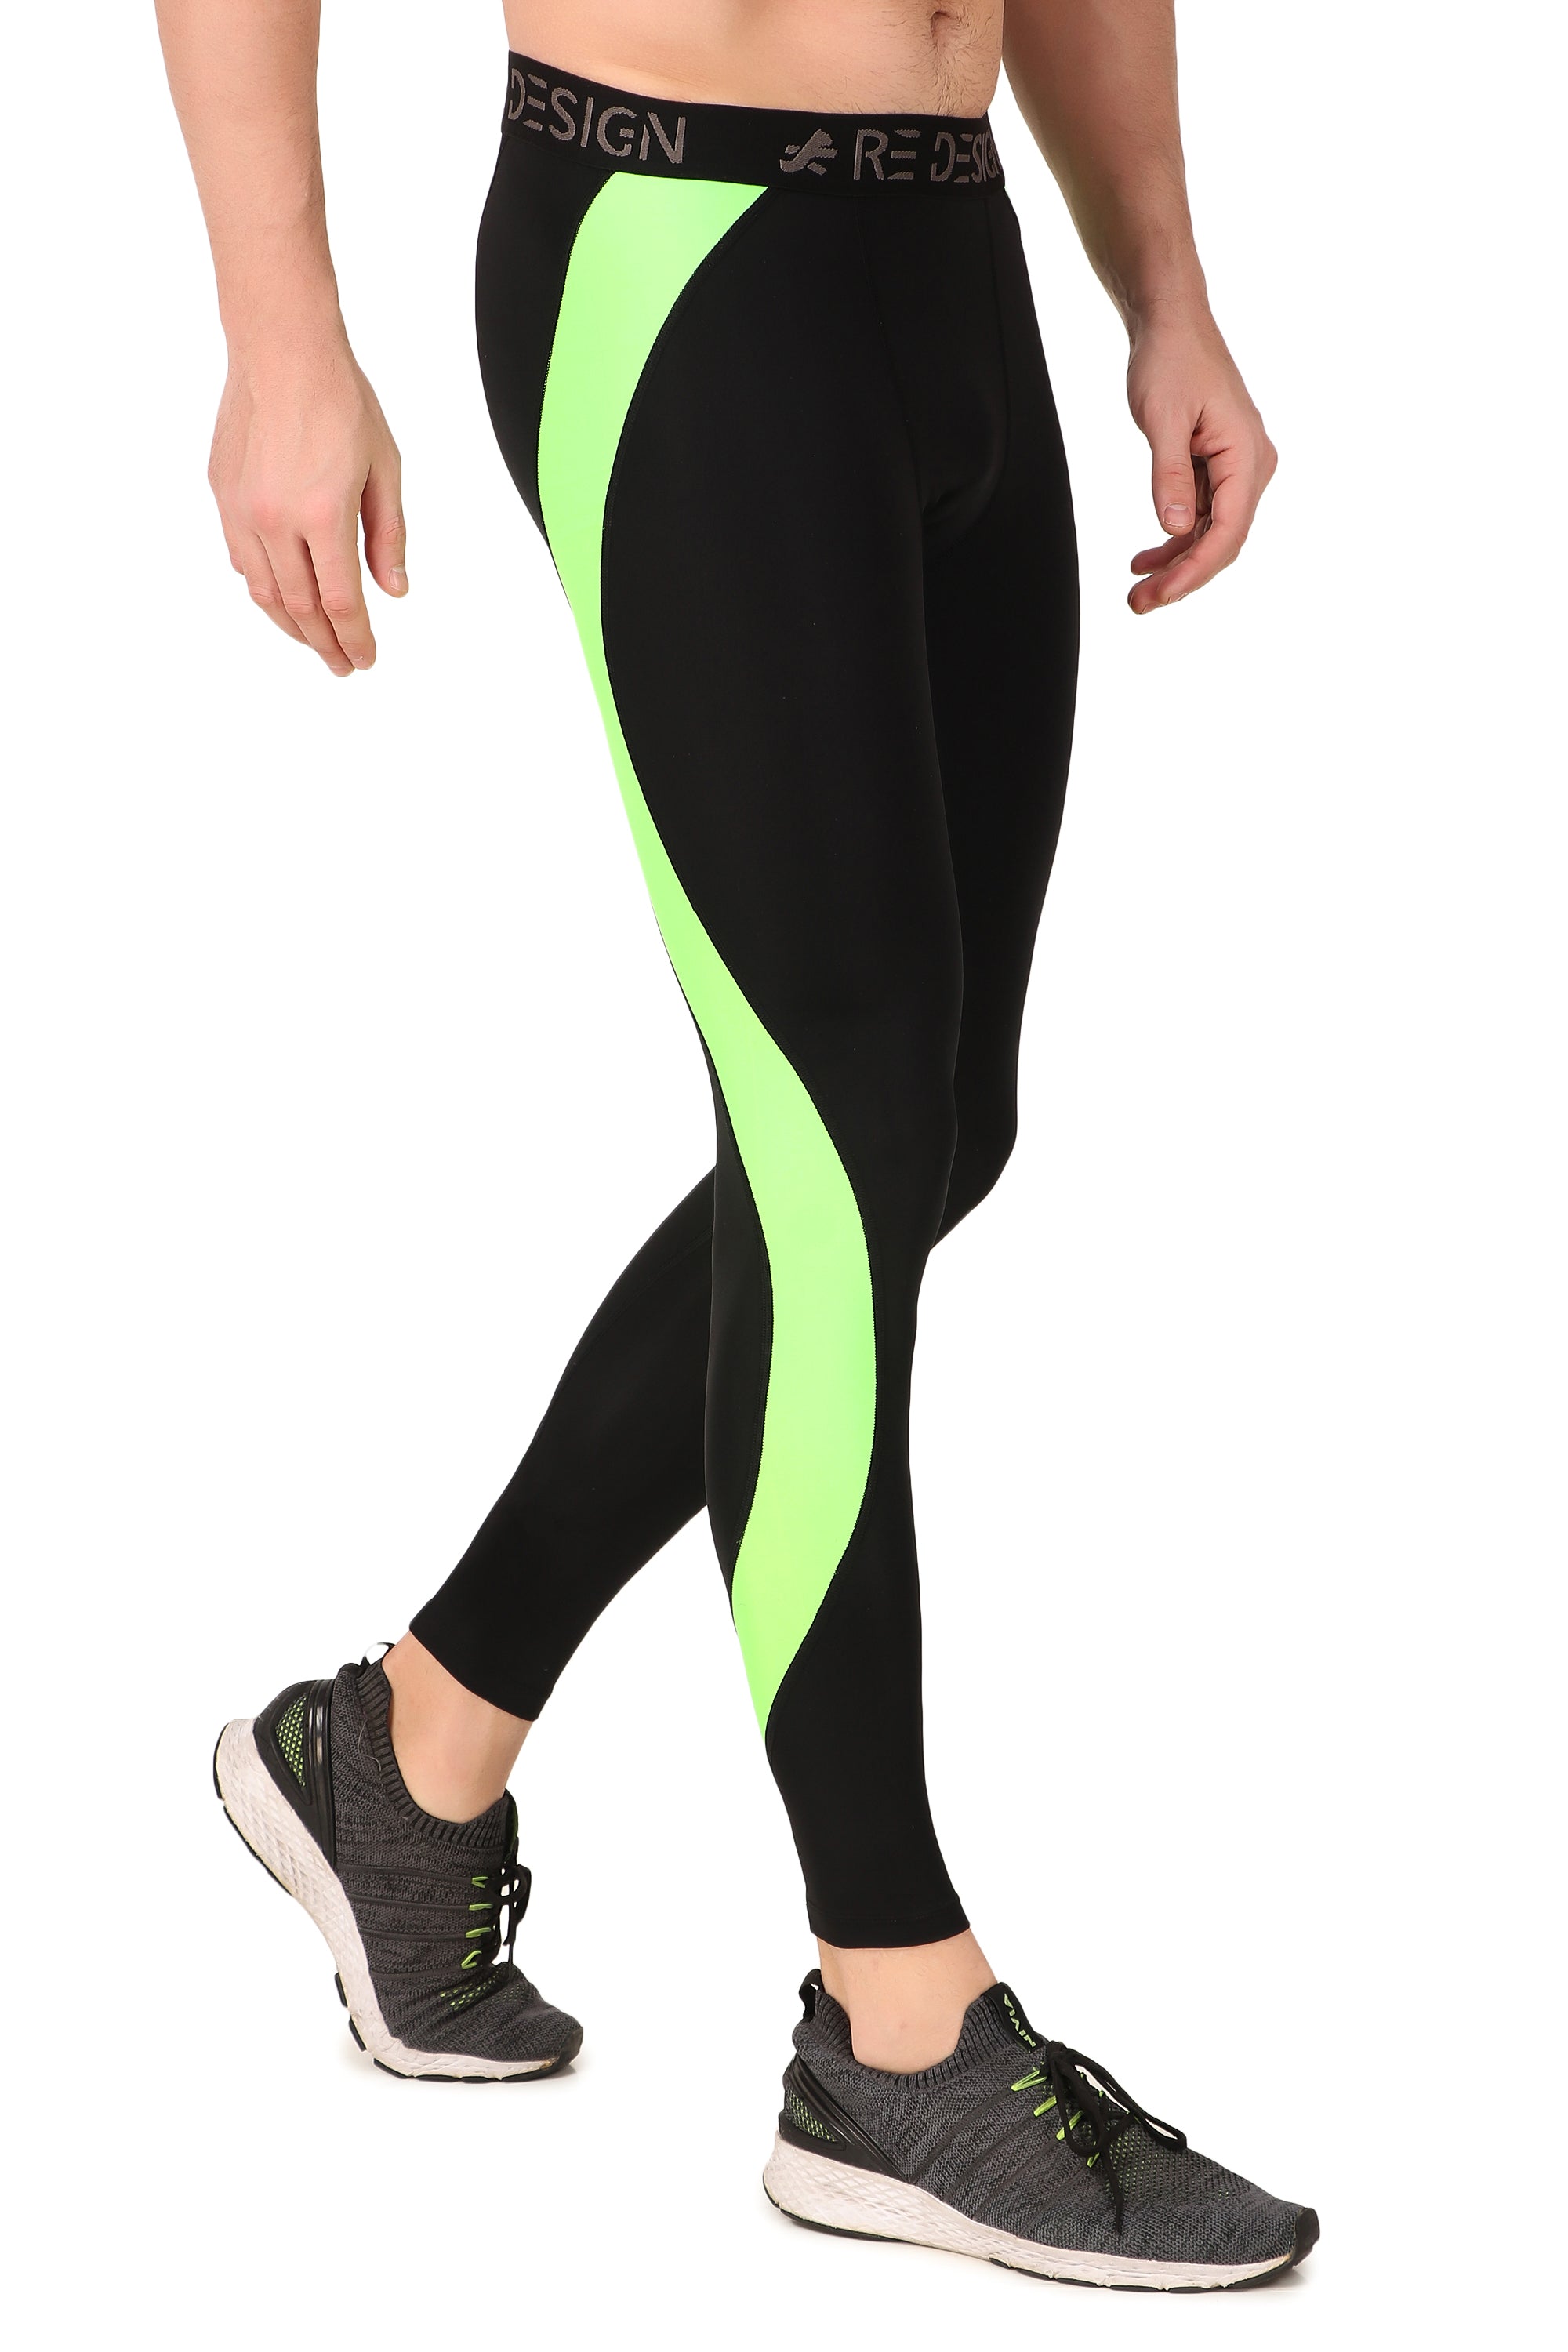 Nylon Compression Pant and Full Tights For Men (BLACK/NEON GREEN)